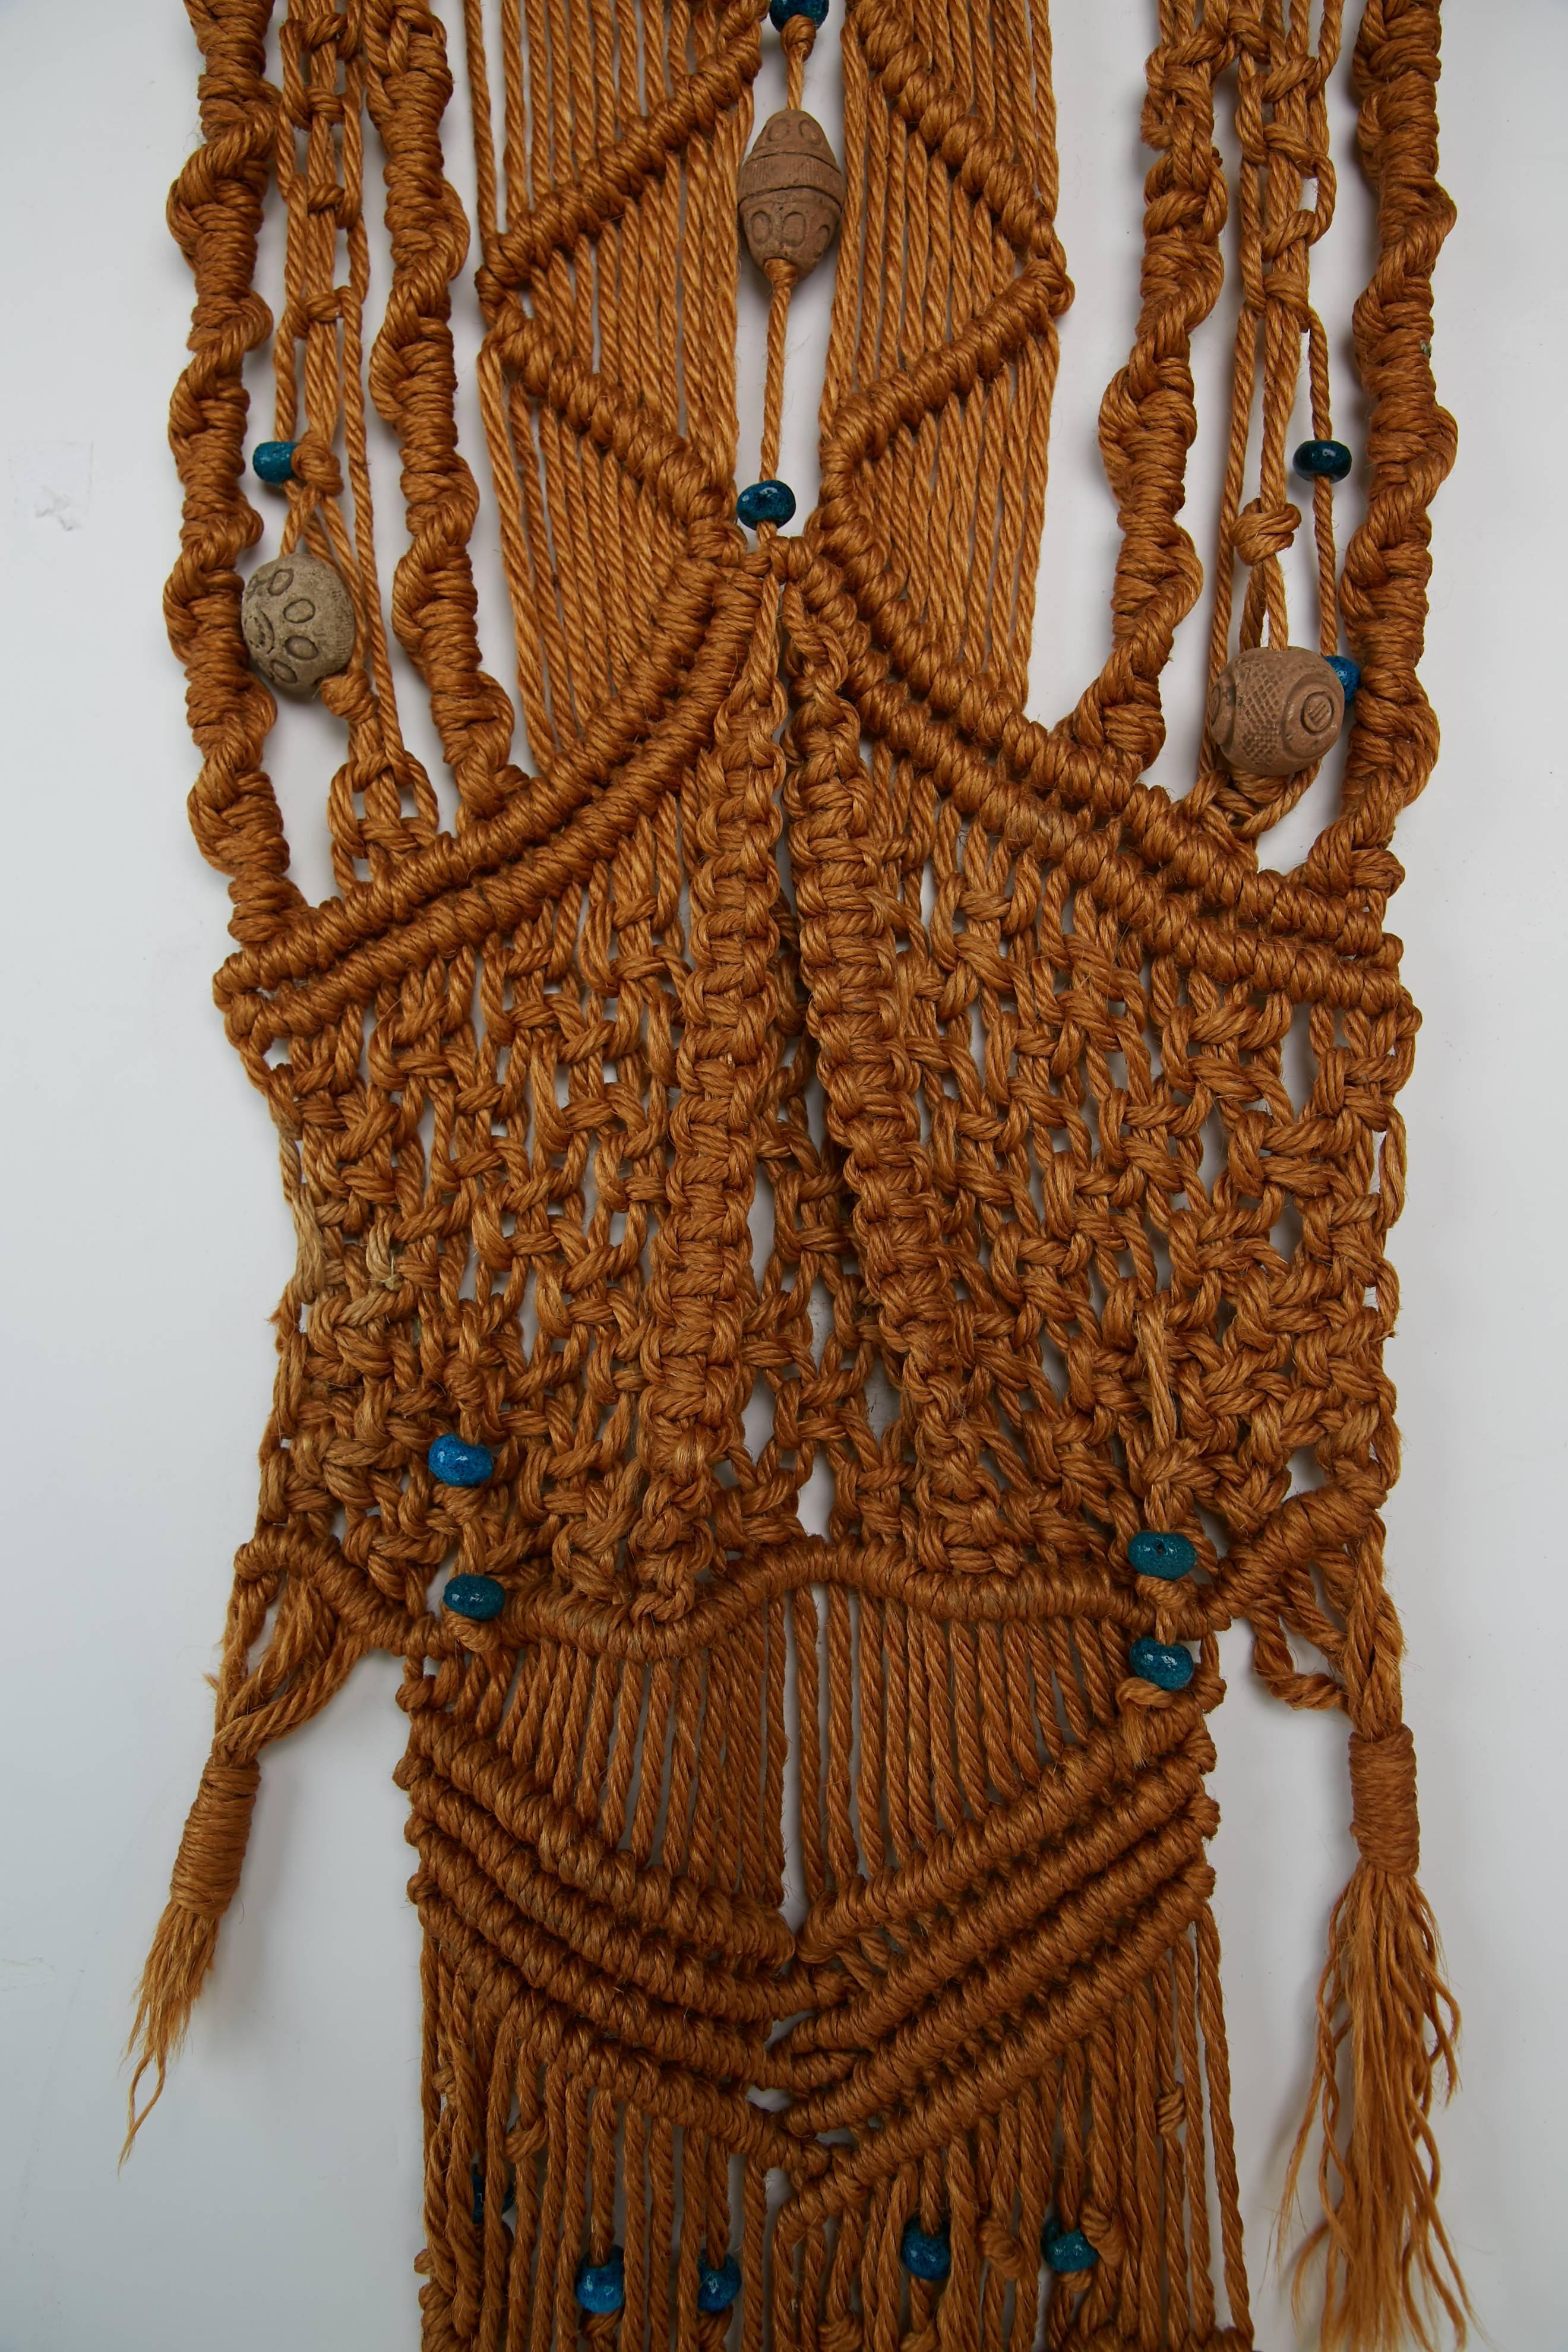 Bohemian Macrame Wall Hanging with Clay and Azure Beads, circa 1970